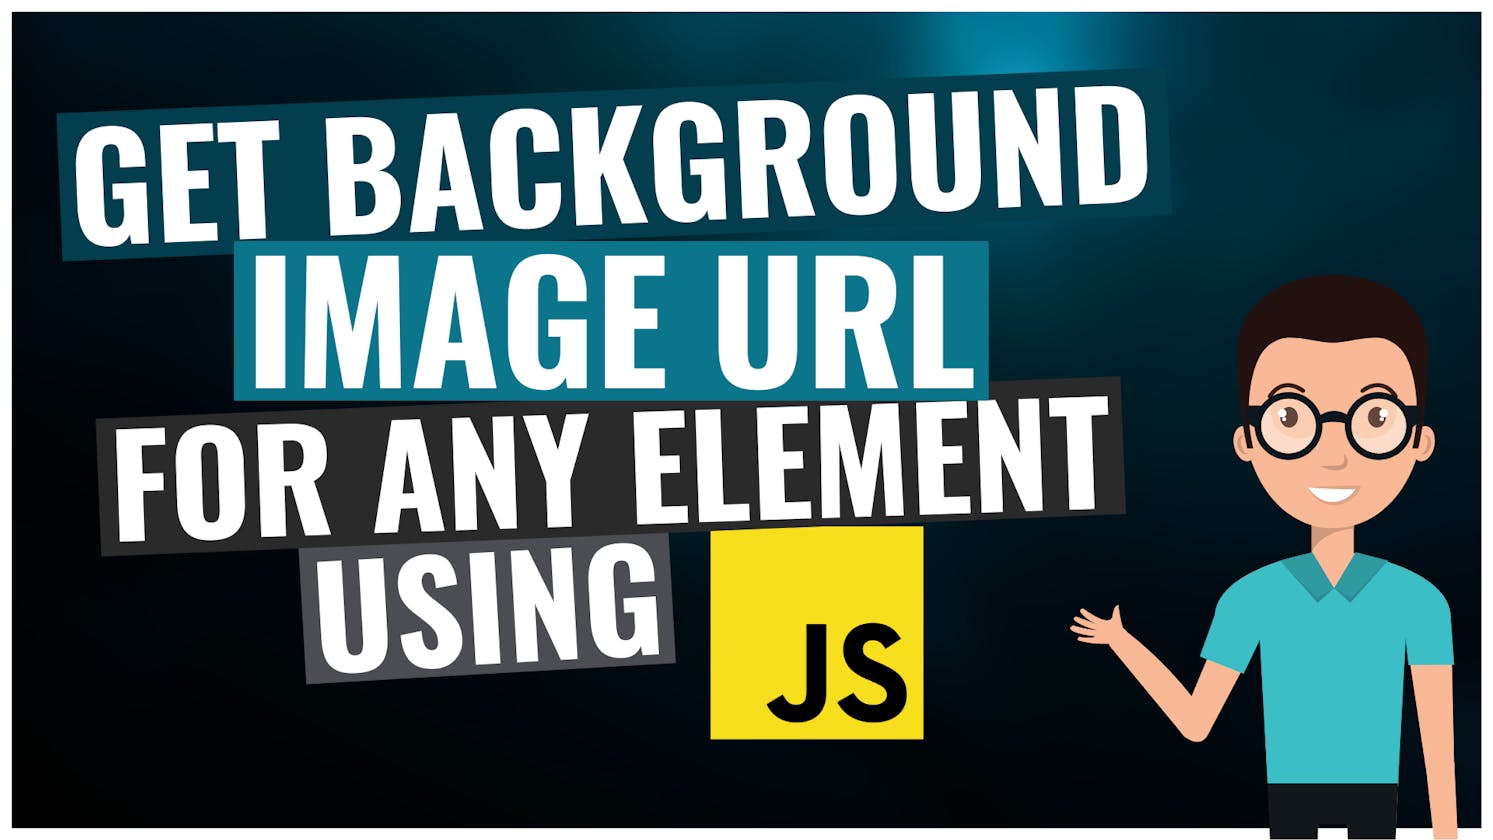 Get background image URL for any element using JavaScript